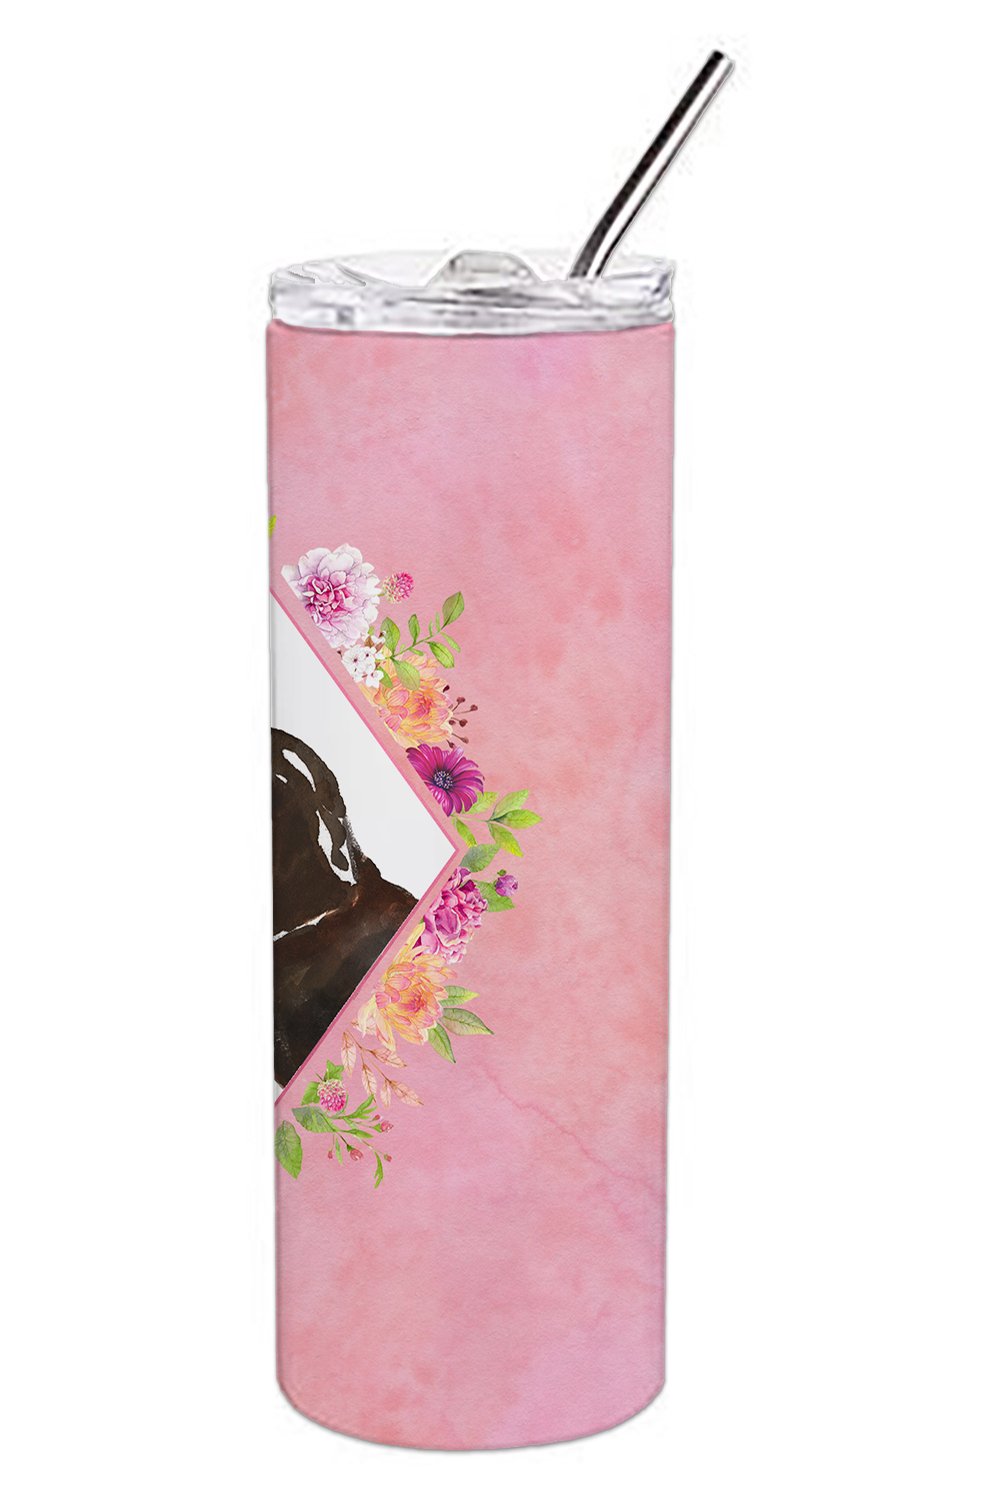 Black and Tan Dachshund Pink Flowers Double Walled Stainless Steel 20 oz Skinny Tumbler CK4262TBL20 by Caroline's Treasures